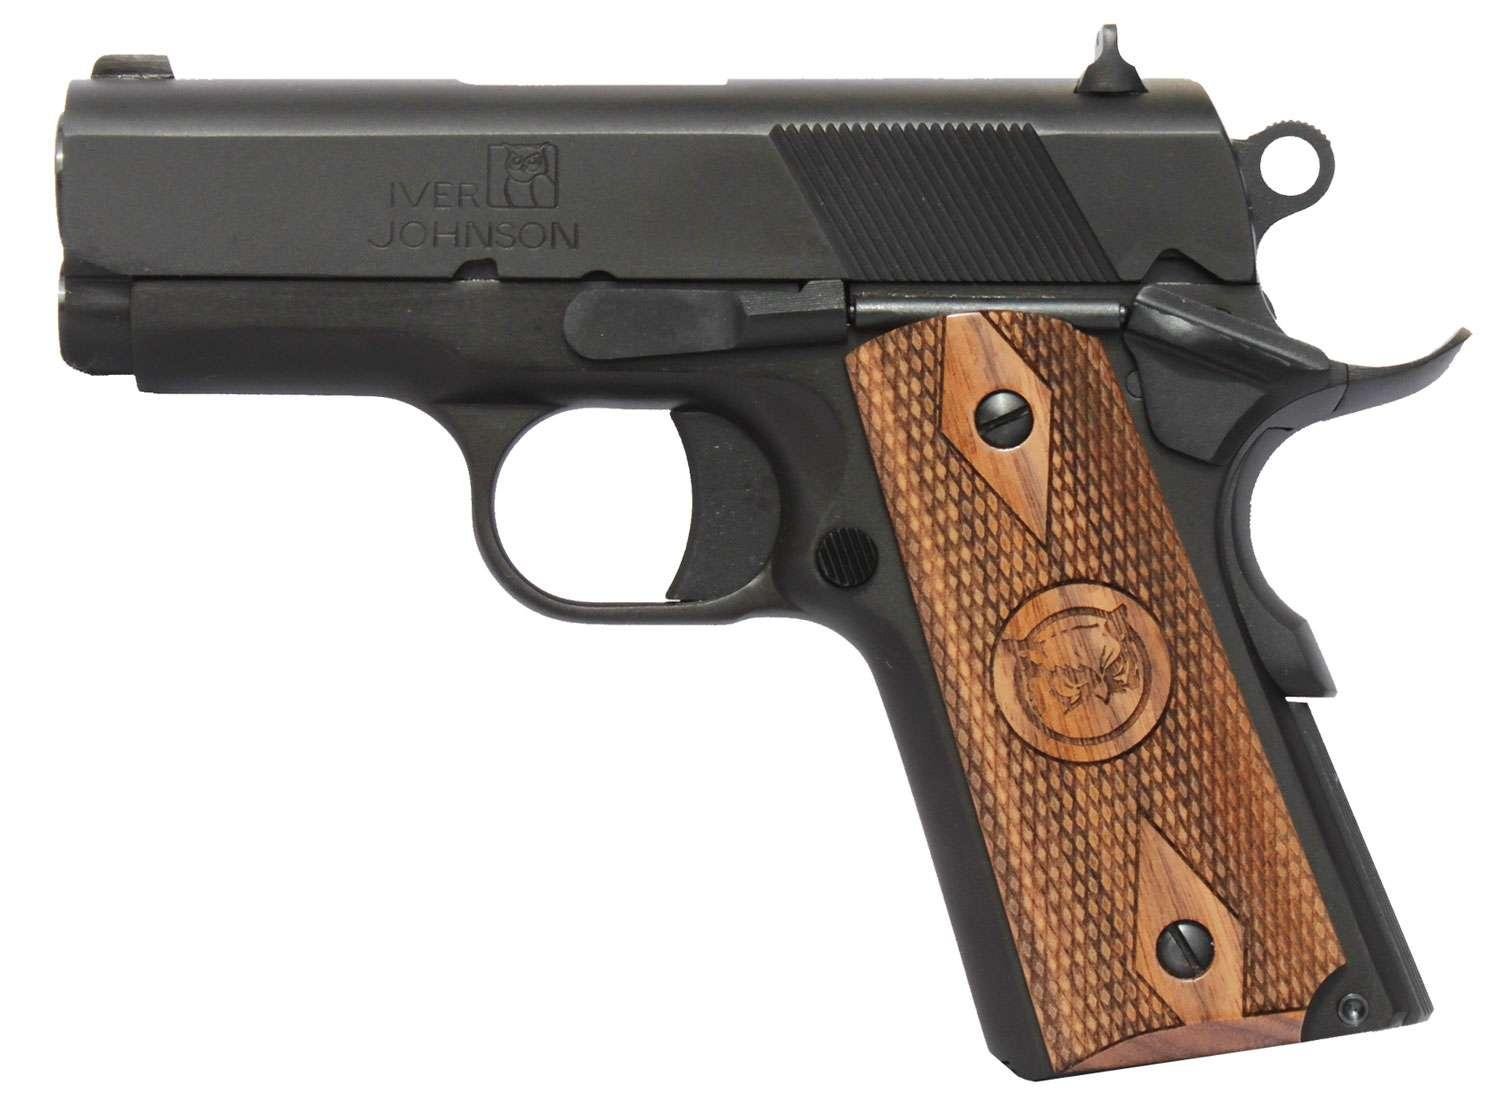 Iver Johnson 1911 Thrasher Officer 9mm 3.13" Barrel 8-Rounds - $561.09 (Add To Cart)